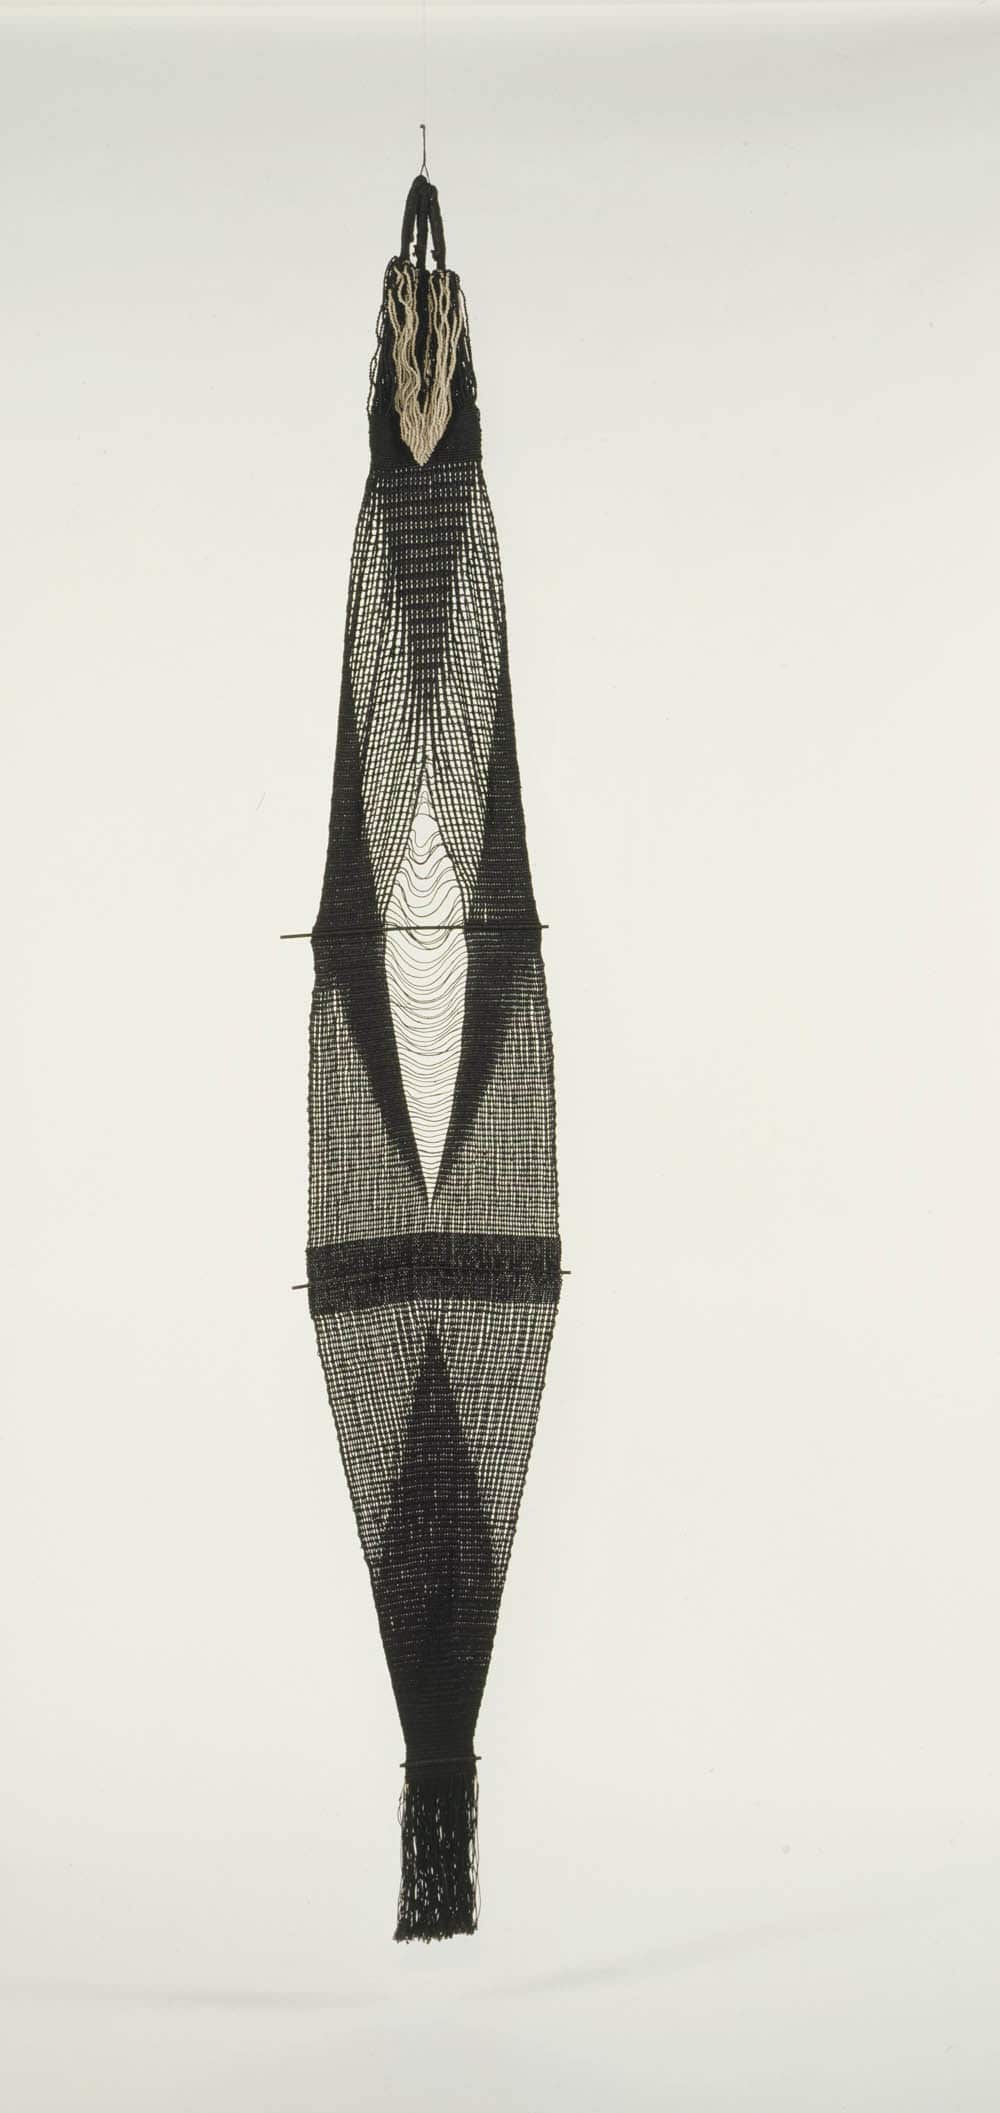 Lenore Tawney, Black Woven Form (Fountain), 1966